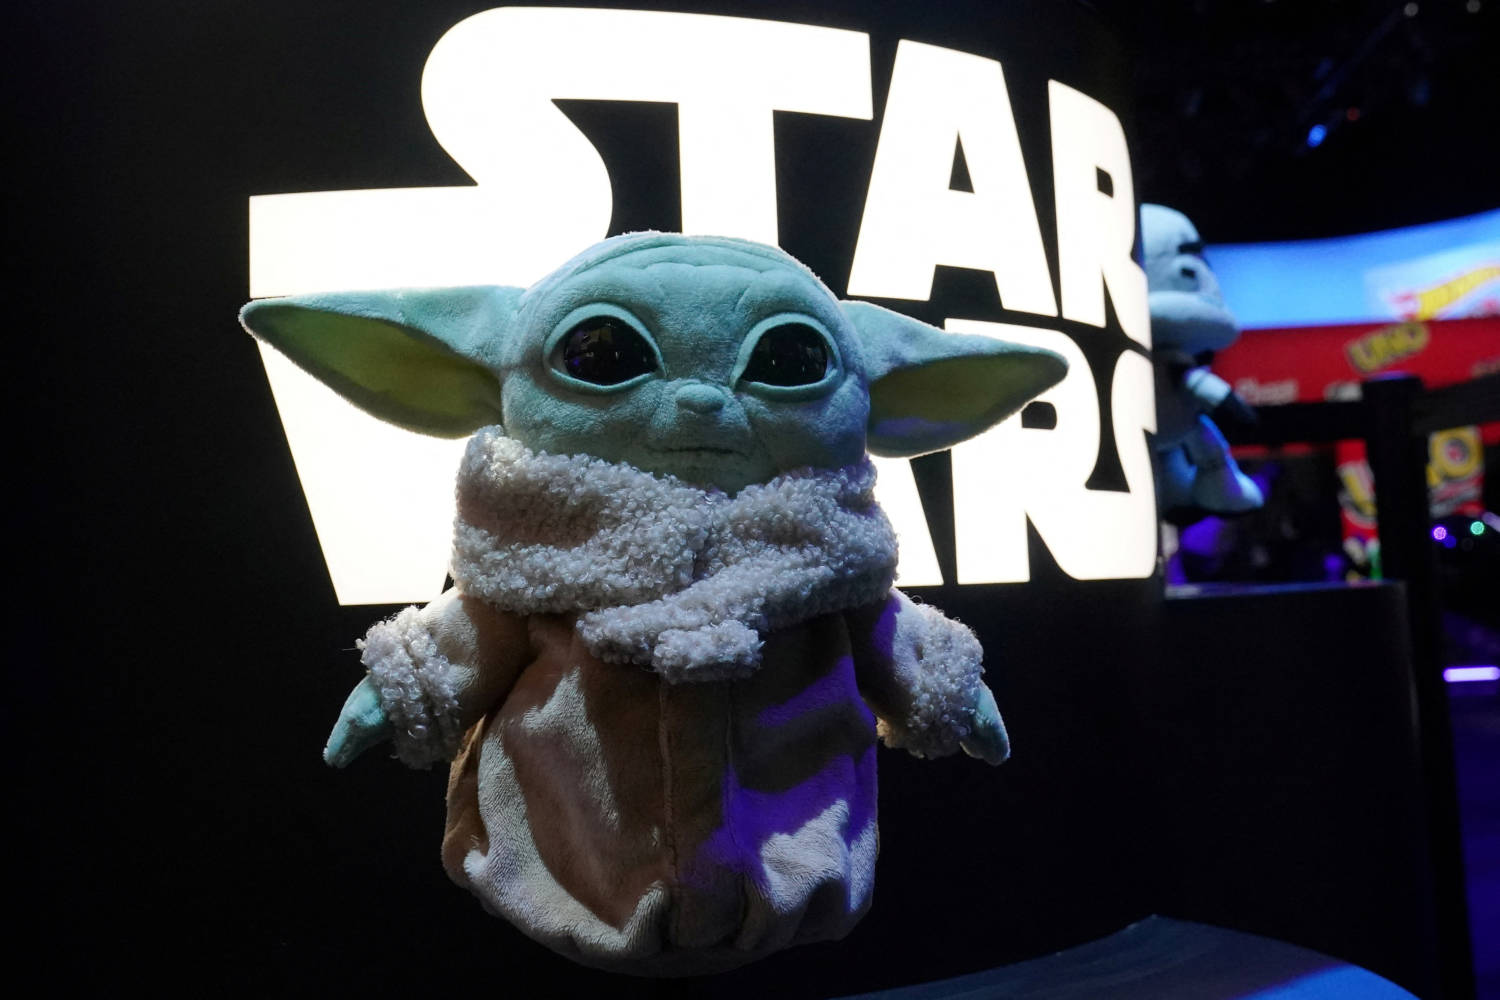 File Photo: A Baby Yoda Toy From Mattel Is Pictured In The Manhattan Borough Of New York City, New York